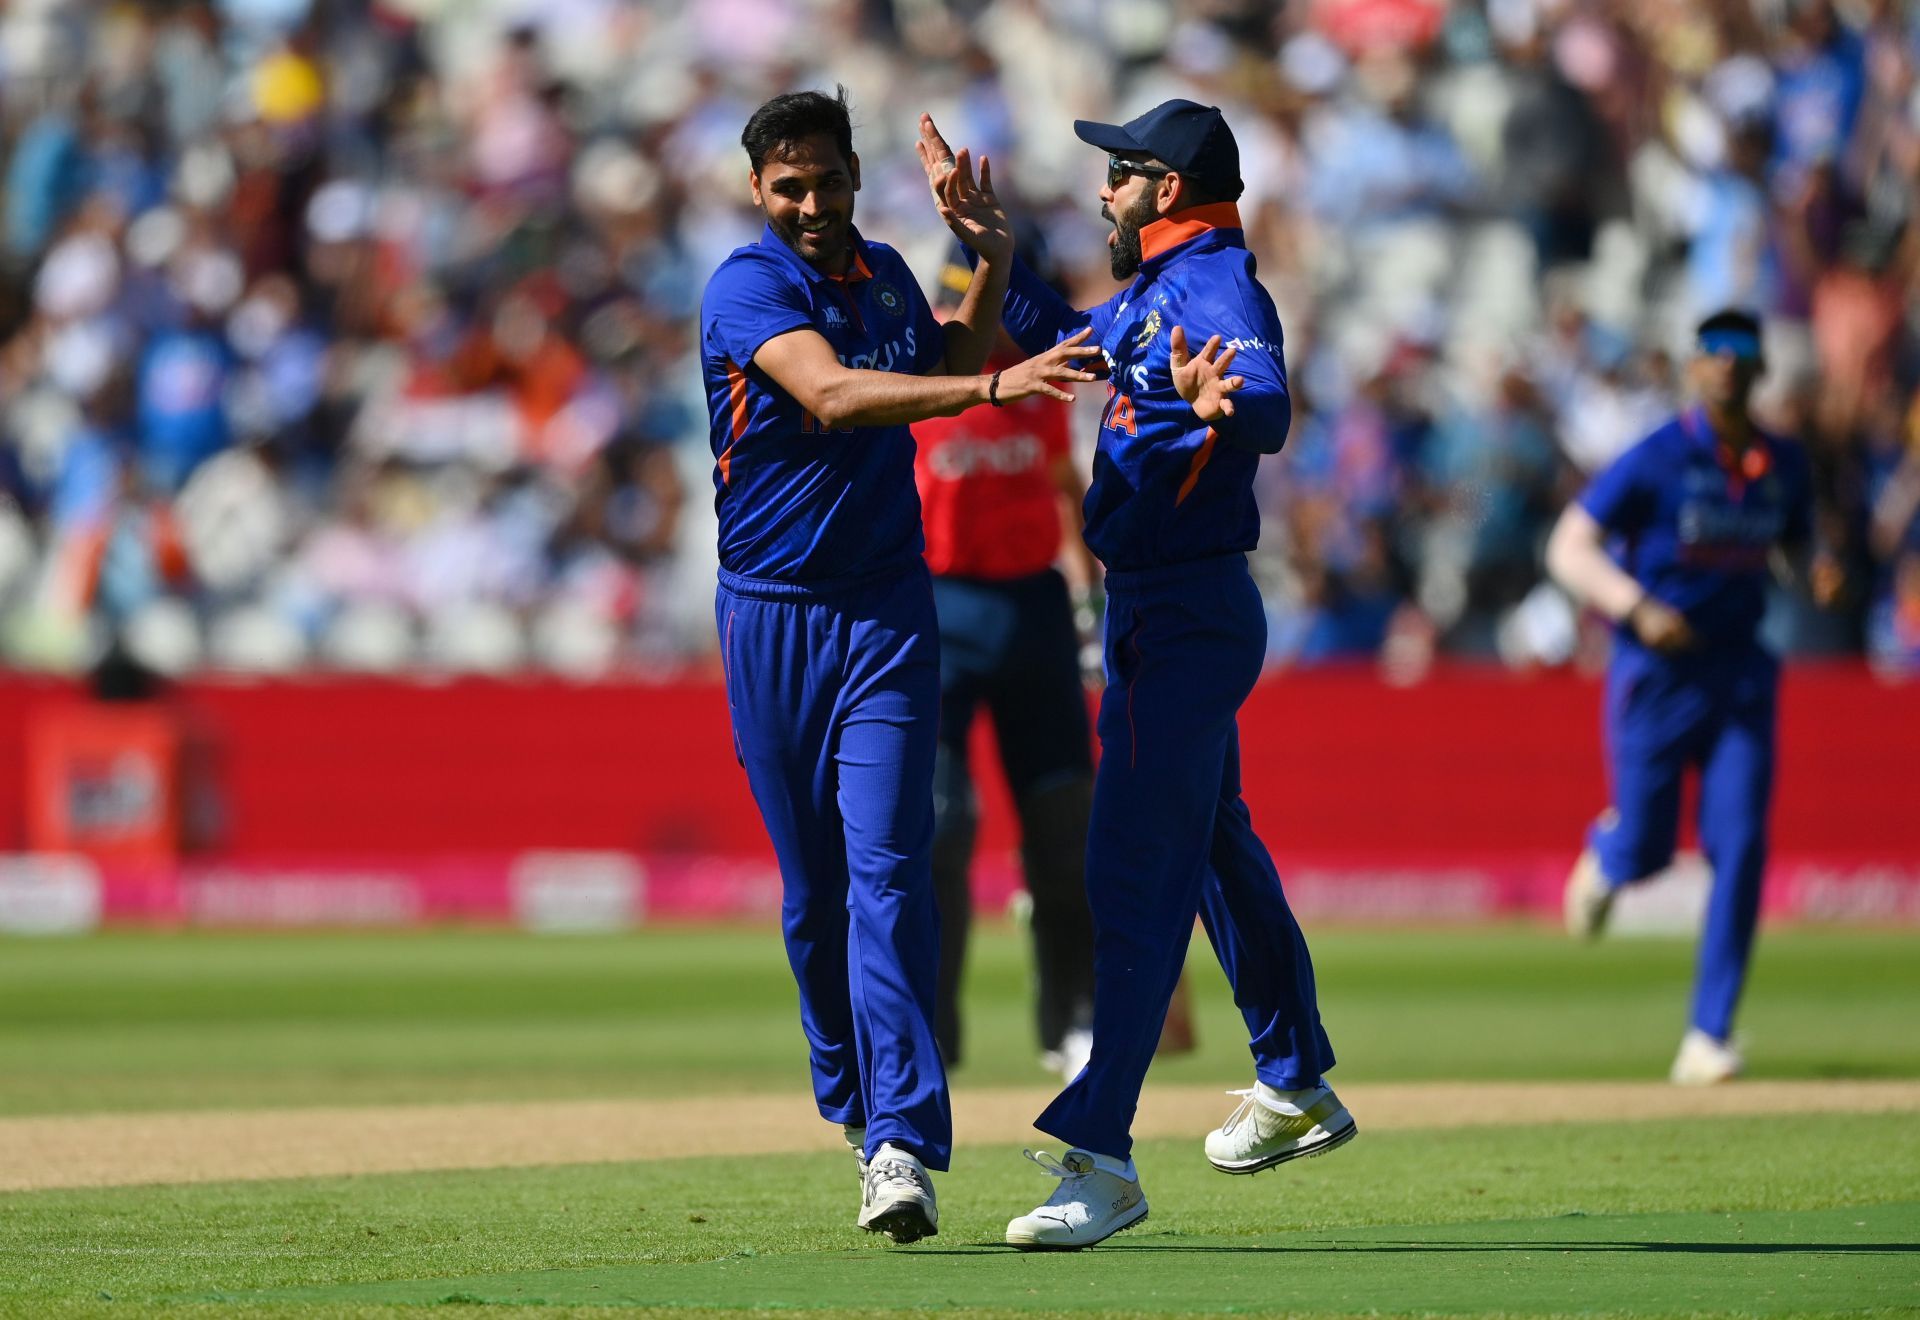 Bhuvneshwar Kumar scalped five wickets against Afghanistan. (Image: Getty)